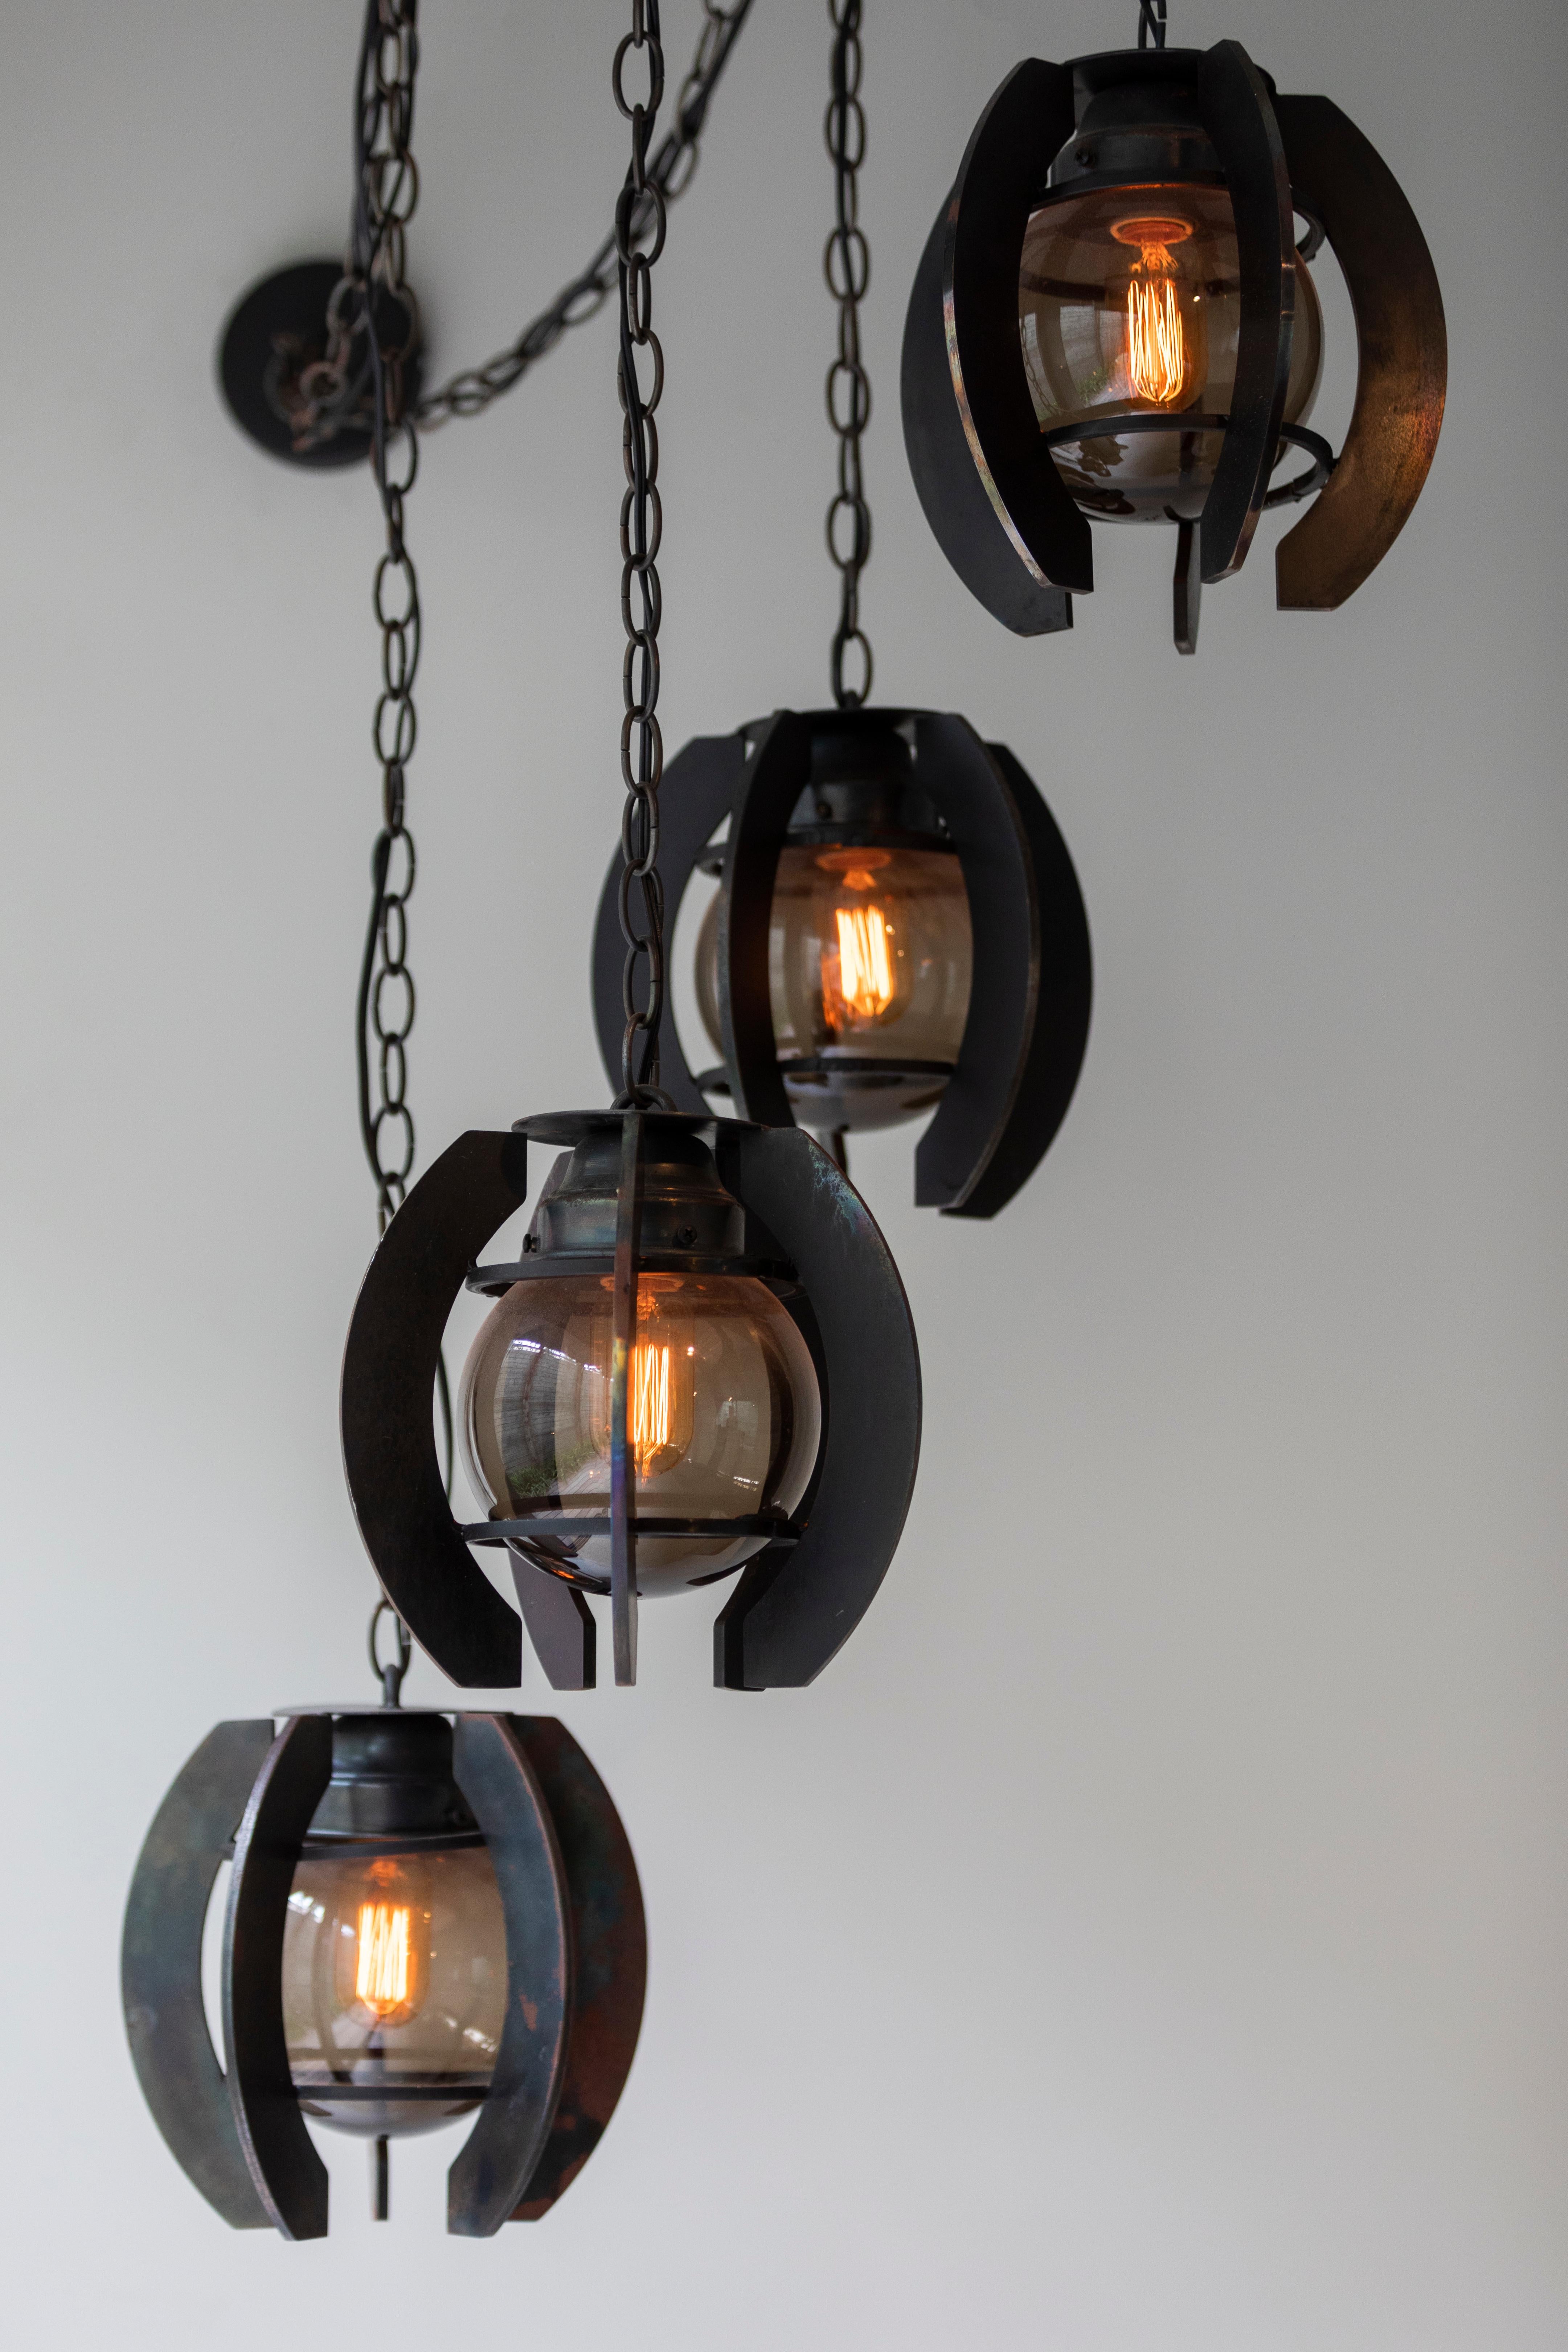 Industrial style chandelier with steel that is burnt black in a forge. Inspired by underwater mines. Comes on burnt black chain, matching canopy and 60 watt Edison style bulb. UL listed. 100% made in Los Angeles.

Set includes four Orb pendants